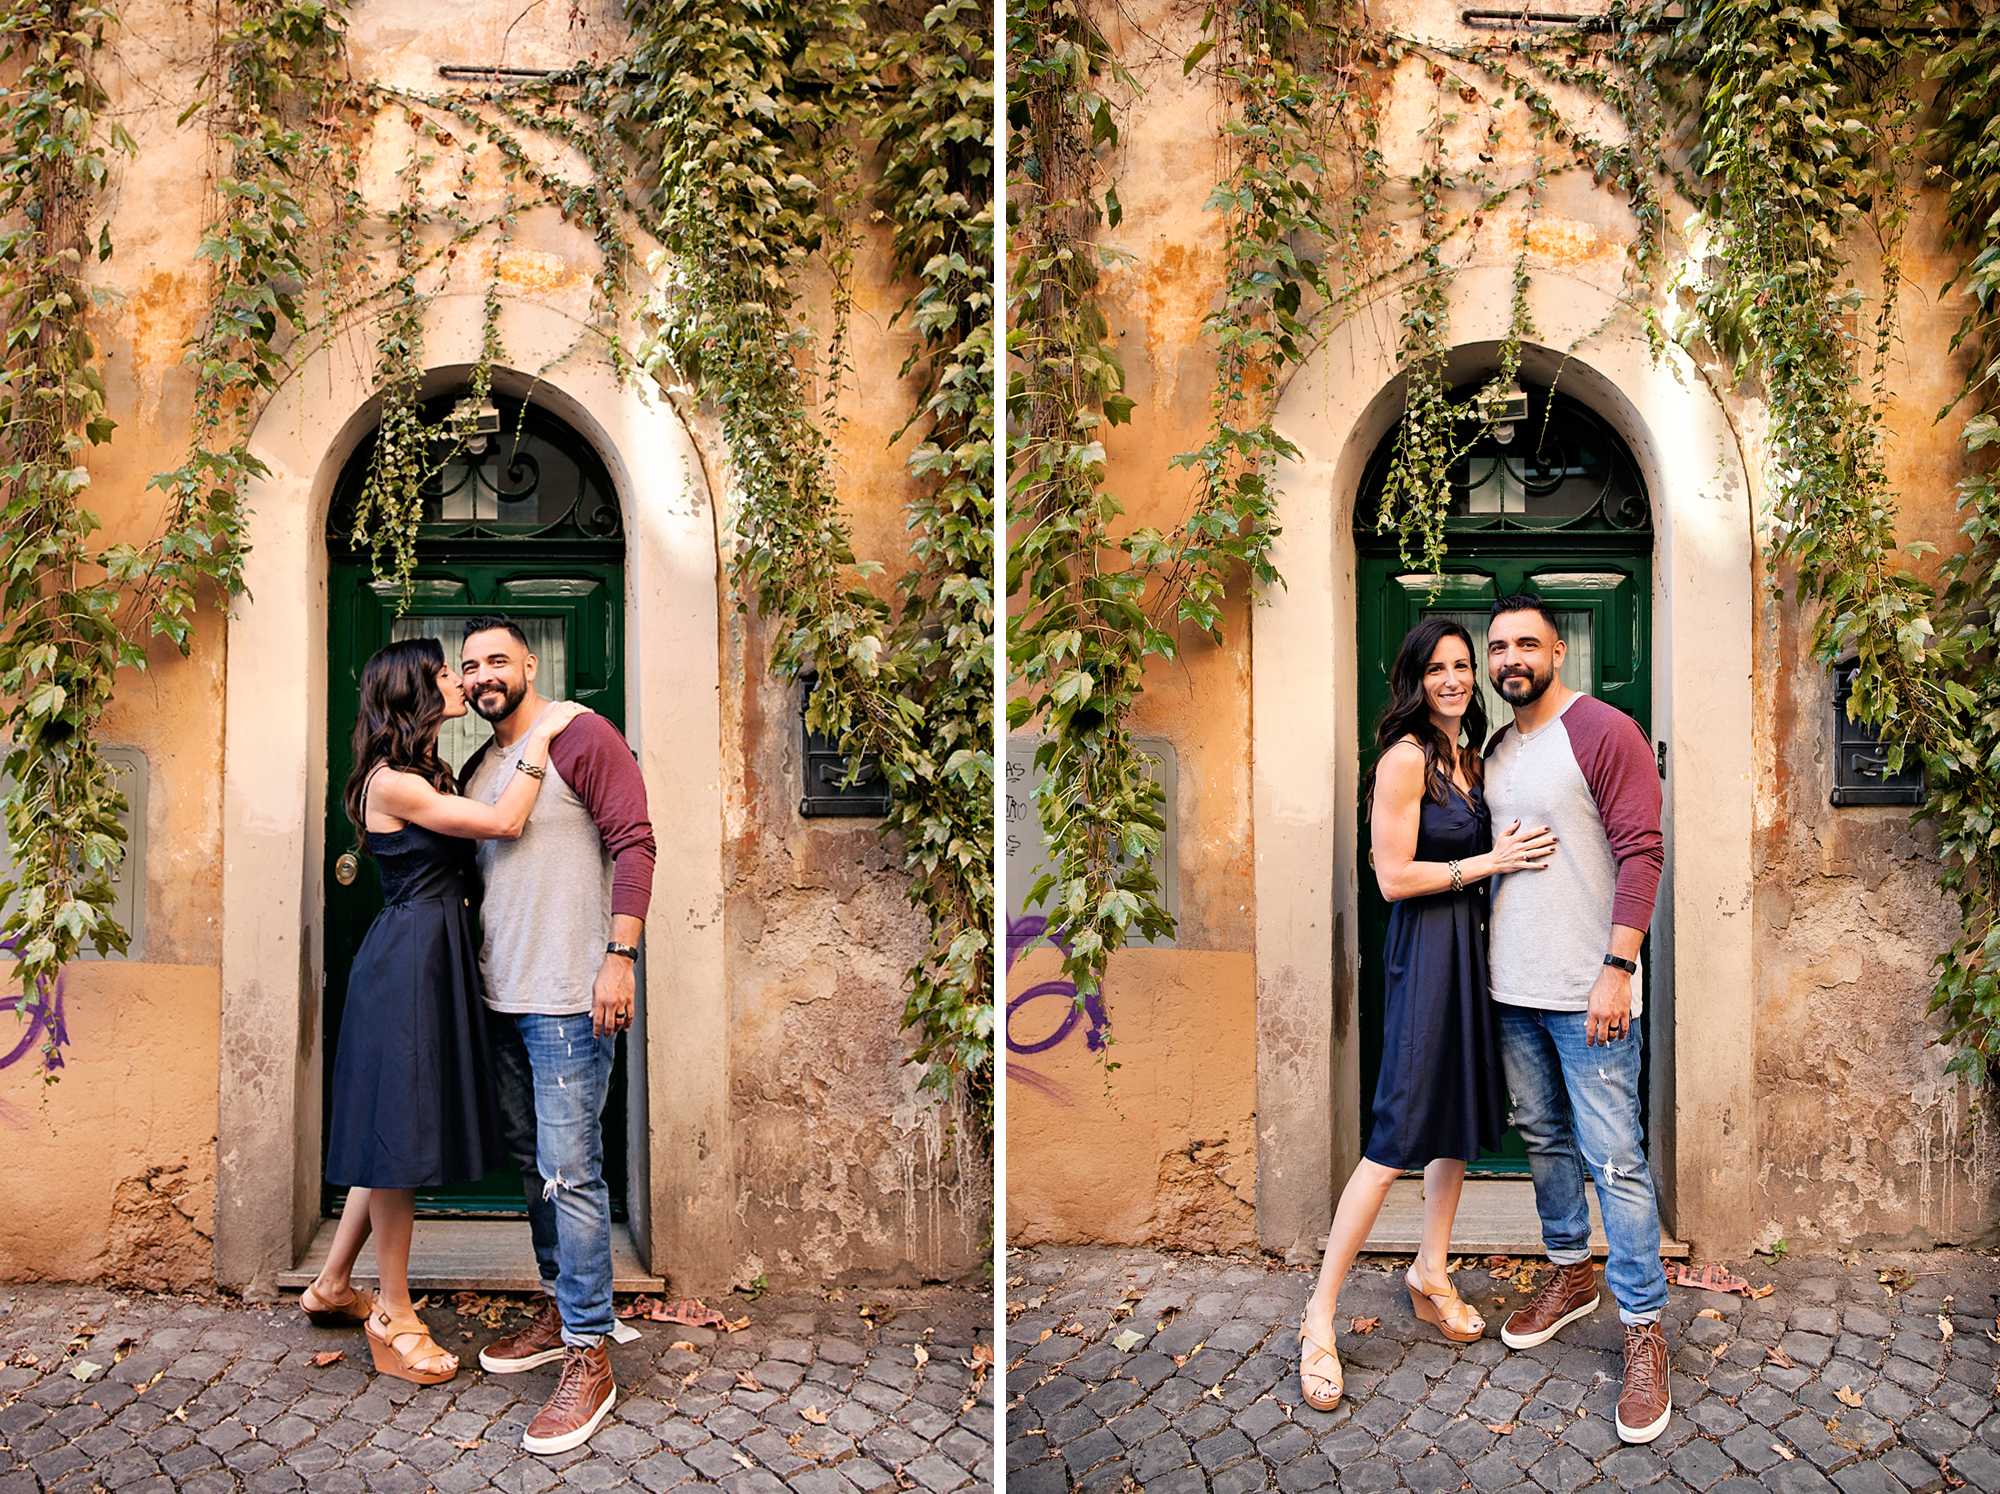 Honeymoon, vacation, family, engagement, maternity, wedding, love story individual and solo photoshoots in Rome, Italy by photographer Tricia Anne Photography | Rome Photographer, vacation, tripadvisor, instagram, fun, married, bride, groom, love, story, photography, session, photoshoot, wedding photographer, mywed, vacation photographer, engagement photo, honeymoon photoshoot, rome honeymoon, rome wedding, elopement in Rome, honeymoon photographer rome, Family Photo shoot Rome, Rome Family Photography, Rome Family Photographer, Trastevere Photo shoot, Trastevere Photography, family photo shoot